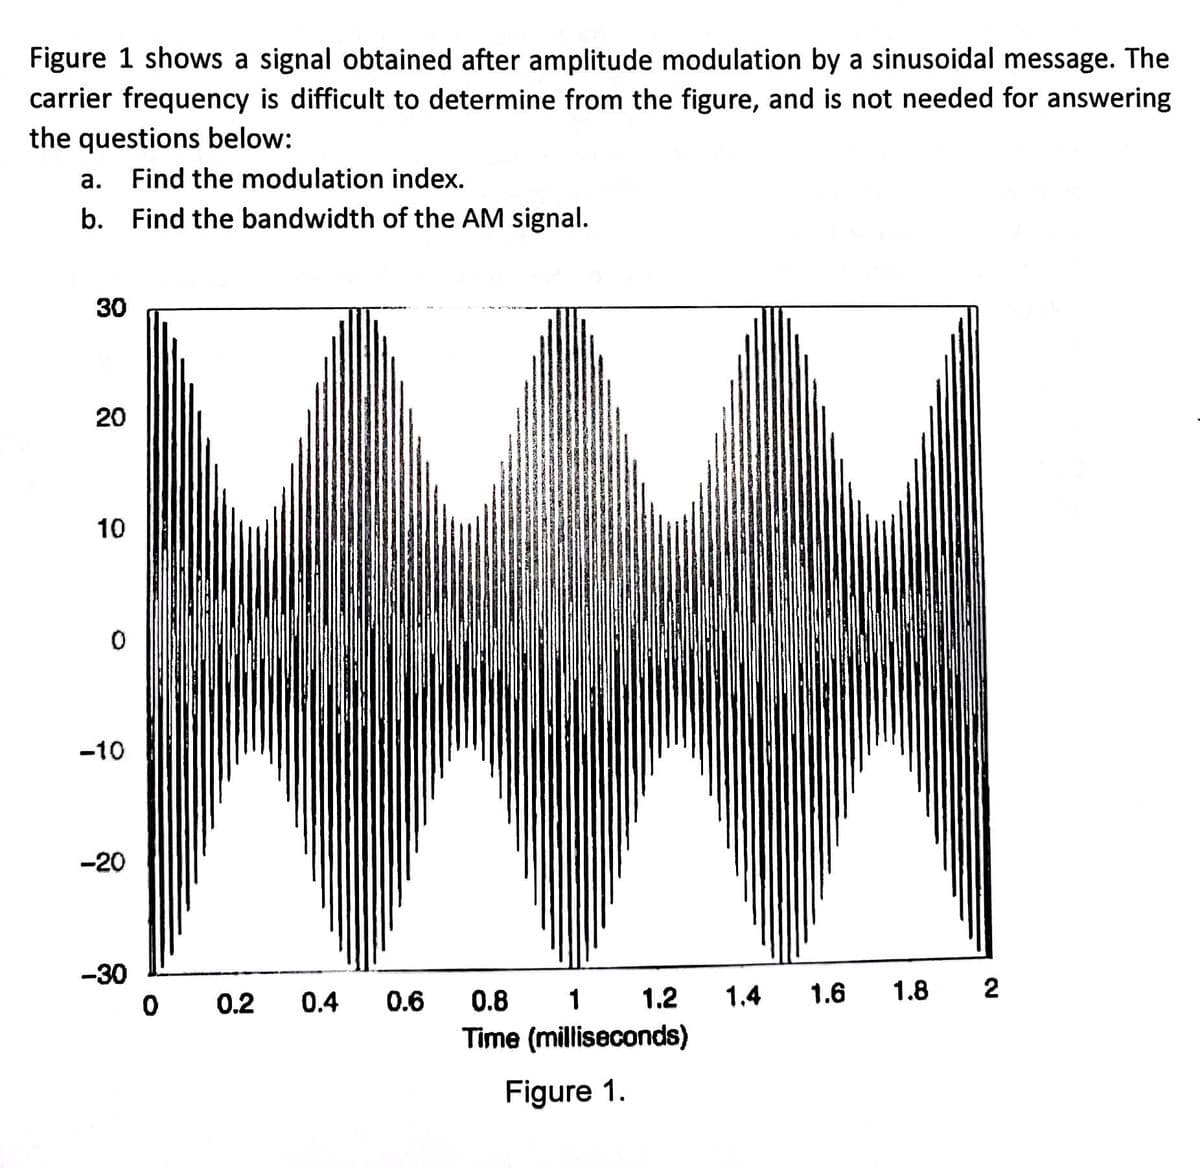 Figure 1 shows a signal obtained after amplitude modulation by a sinusoidal message. The
carrier frequency is difficult to determine from the figure, and is not needed for answering
the questions below:
a. Find the modulation index.
b. Find the bandwidth of the AM signal.
30
20
10
0
-10
-20
-30
0
0.2
0.4
0.6
0.8
1.4
1 1.2
Time (milliseconds)
Figure 1.
1.6
1.8
2